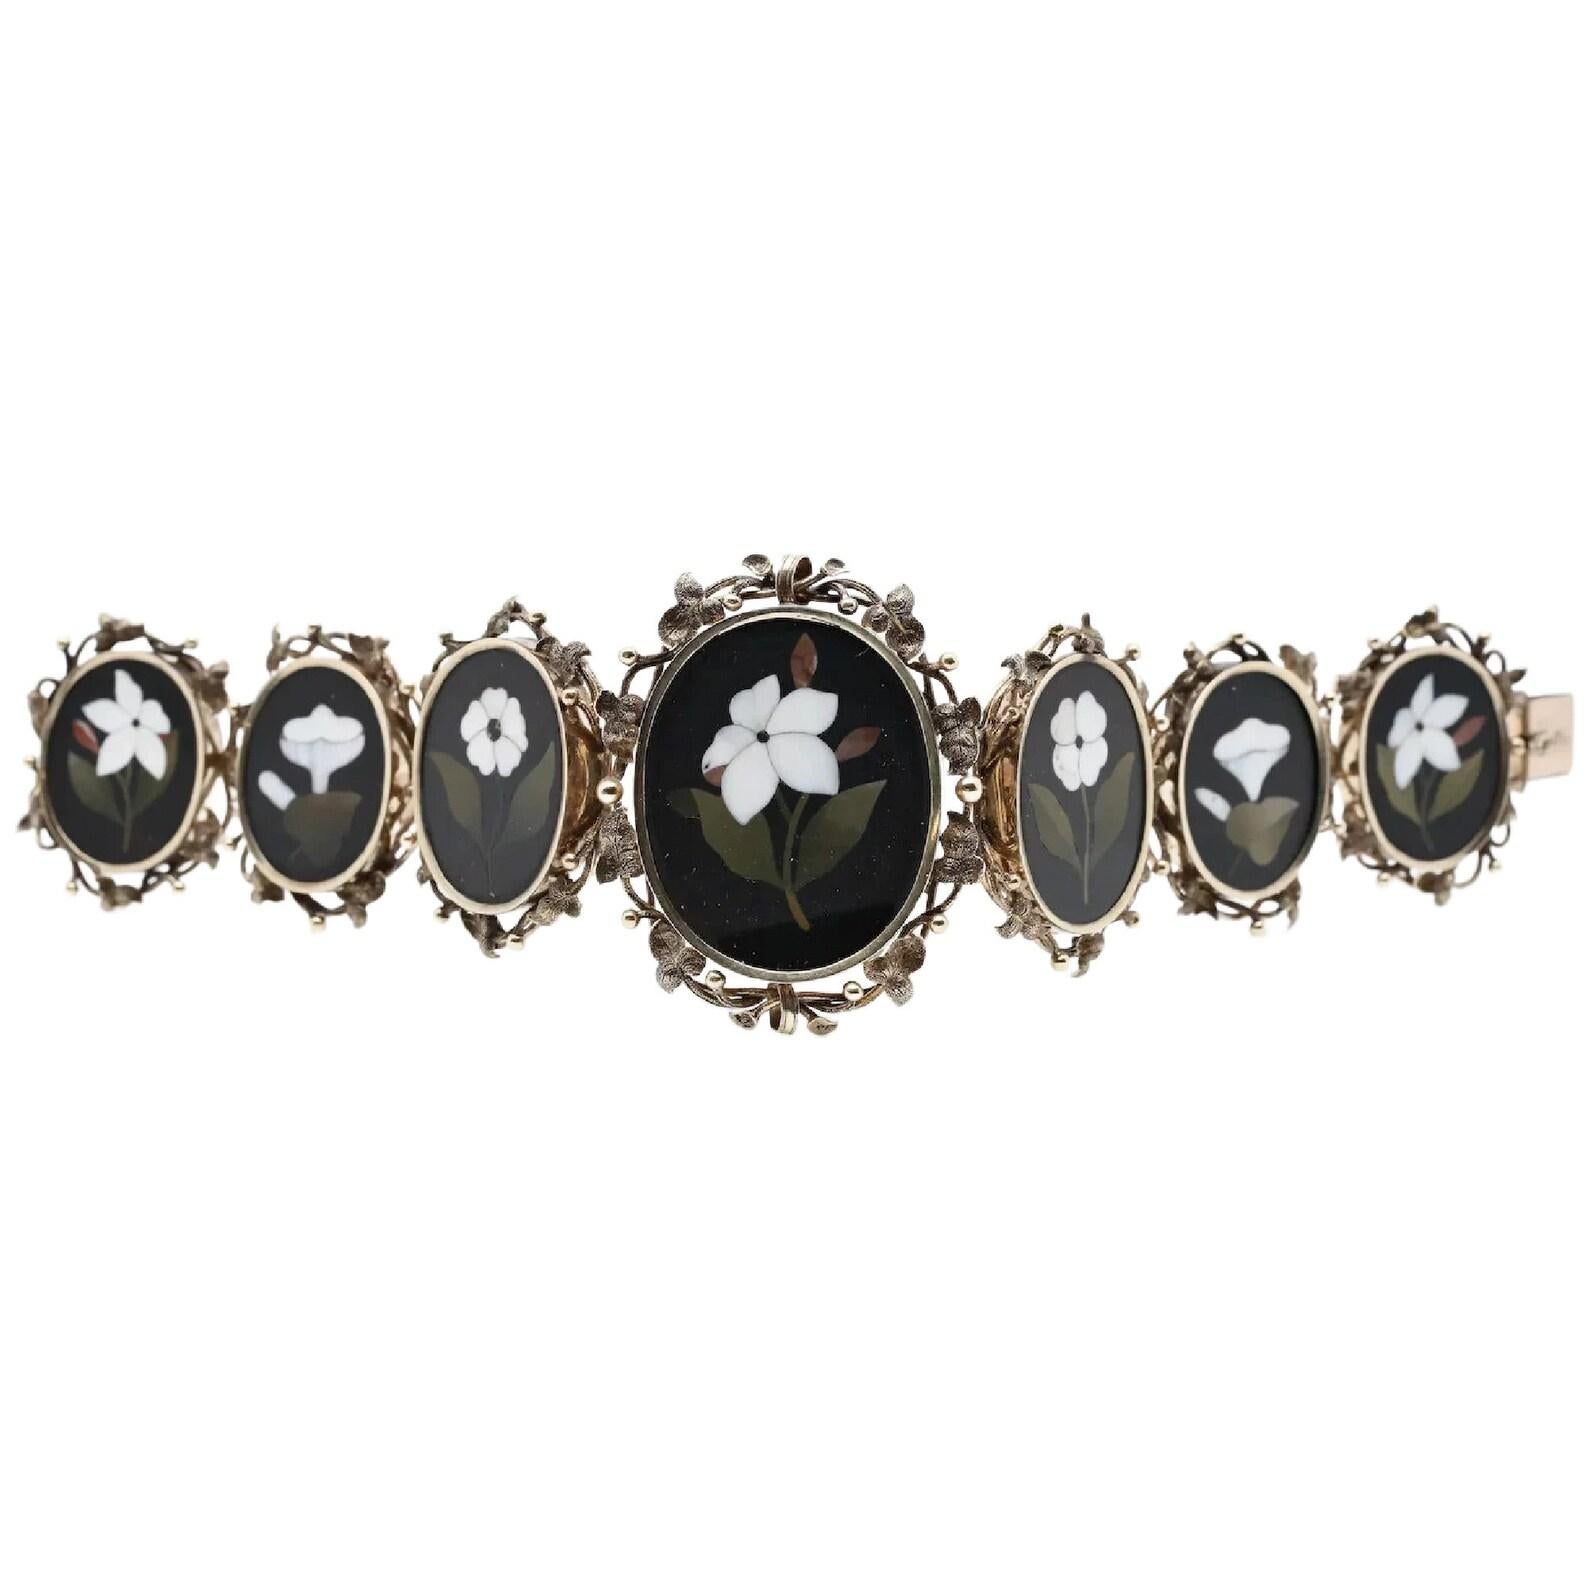 A beautiful victorian period floral motif pietra dura bracelet from Florence Italy circa 1875. Featuring beautifully inlaid Lilies of the Valley and Forget me Not's inlaid in various shades of marble and agate. The uncommonly ornate mounting